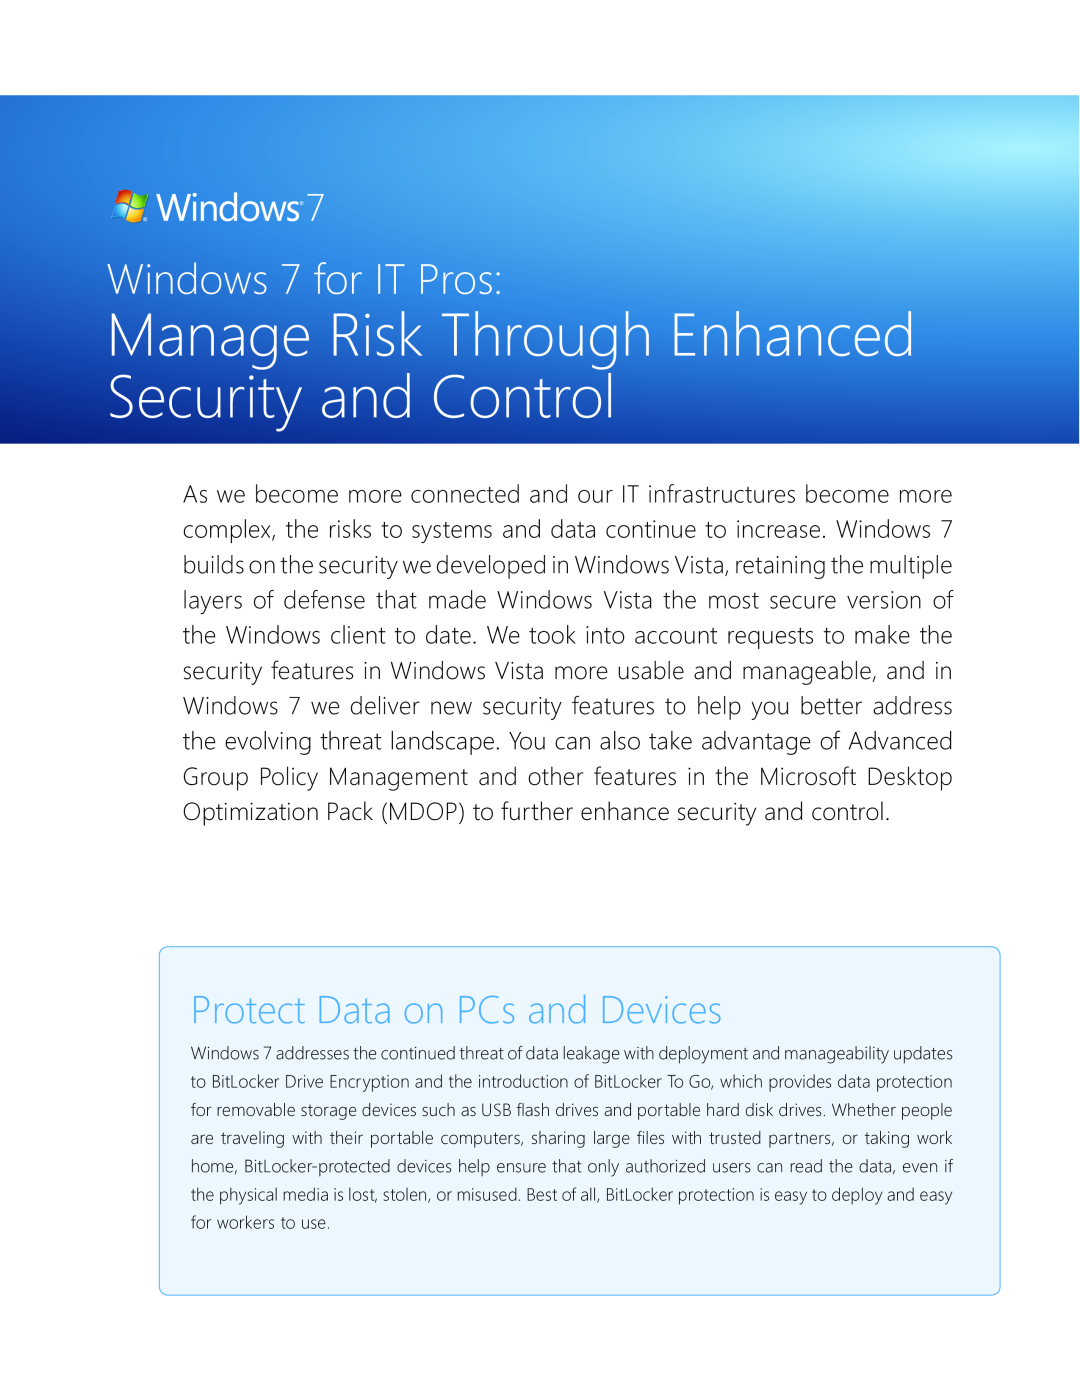 Microsoft GFC02021, GLC00182, GLC01878 Manage Risk Through Enhanced Security and Control, Protect Data on PCs and Devices 